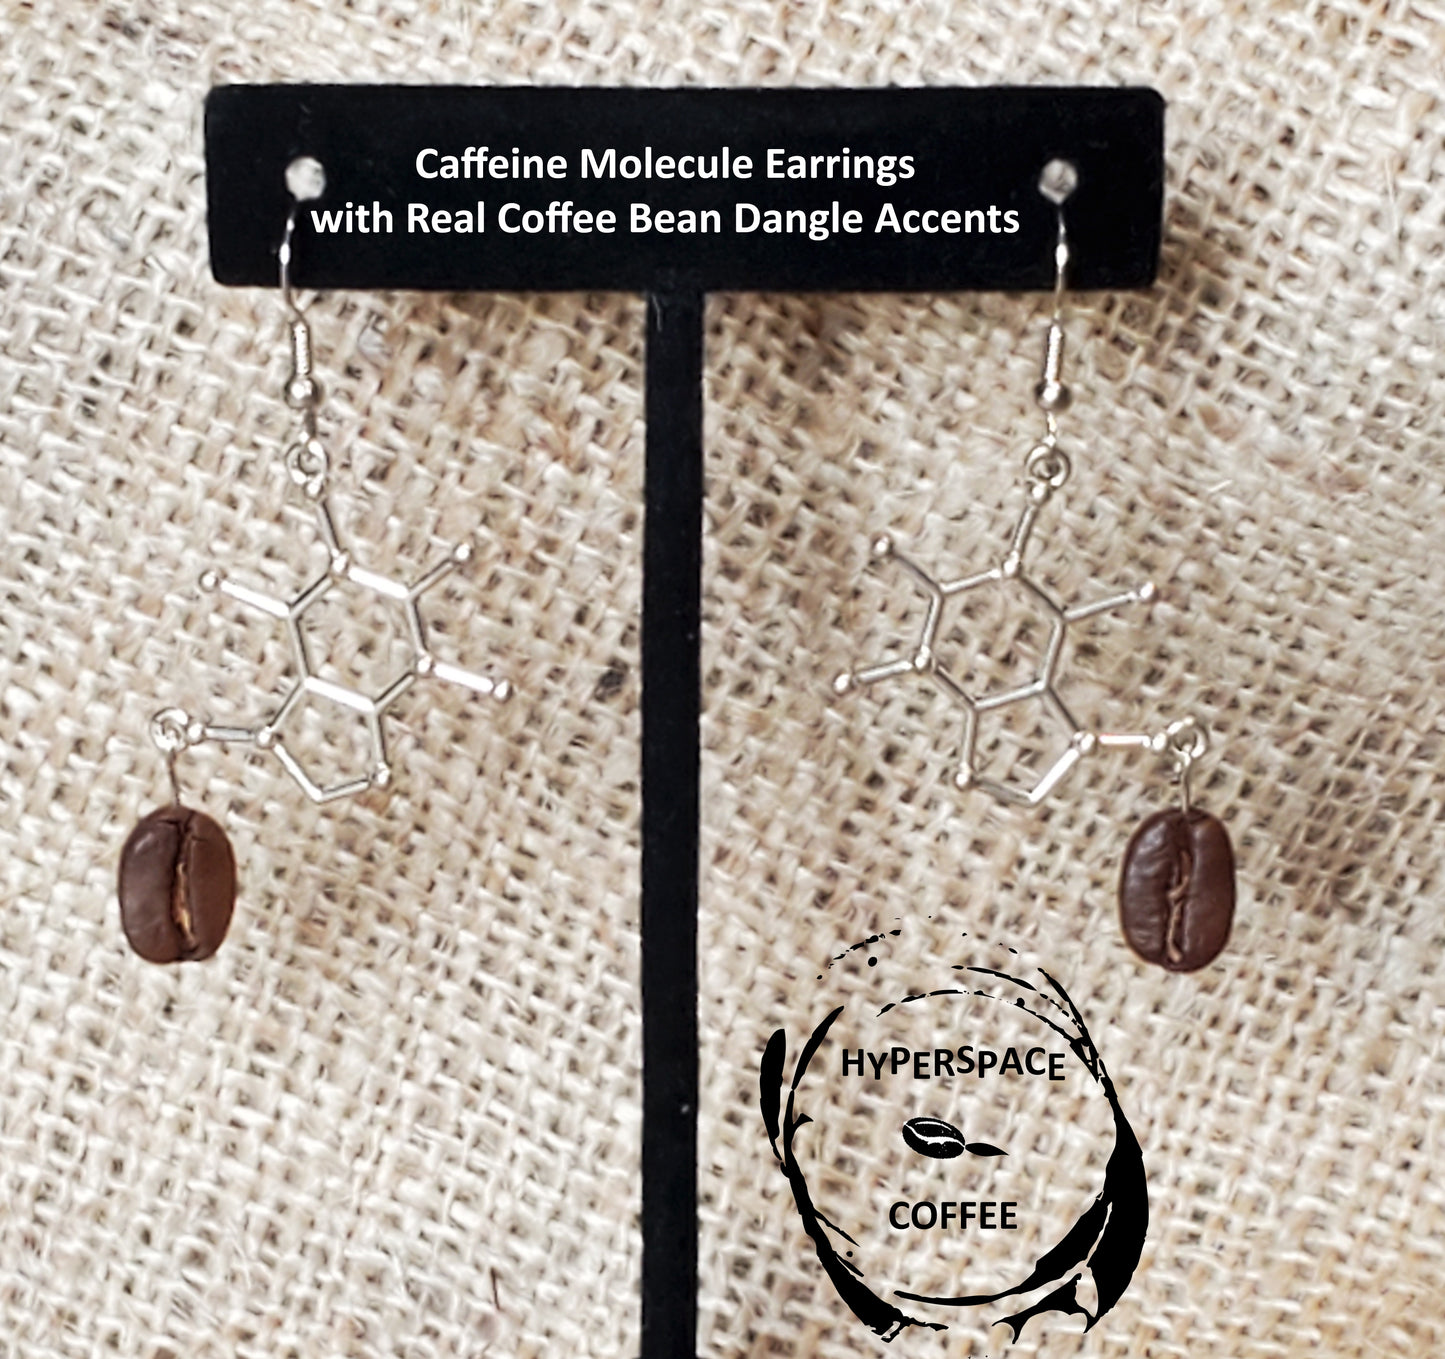 Caffeine Molecule Earrings with Real Coffee Bean Dangle Accents - Coffee and Science Gift, Coffee Earrings